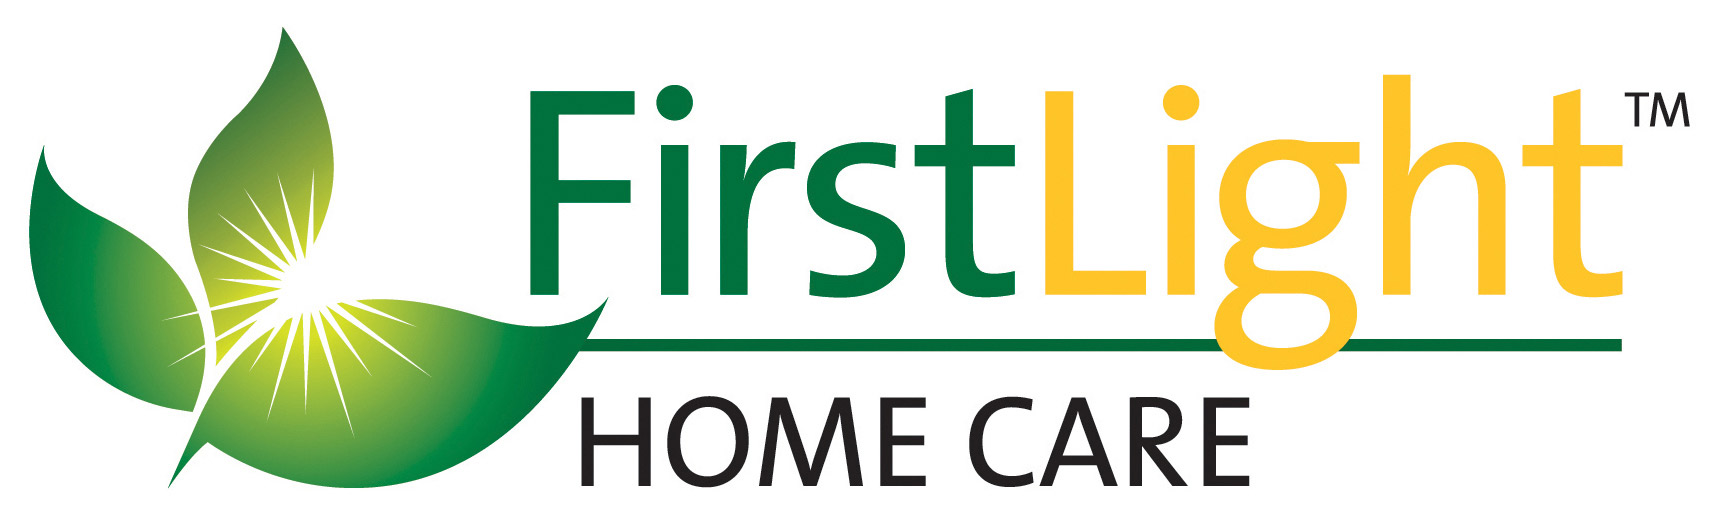 FirstLight Home Care of Greater, Lansing, MI